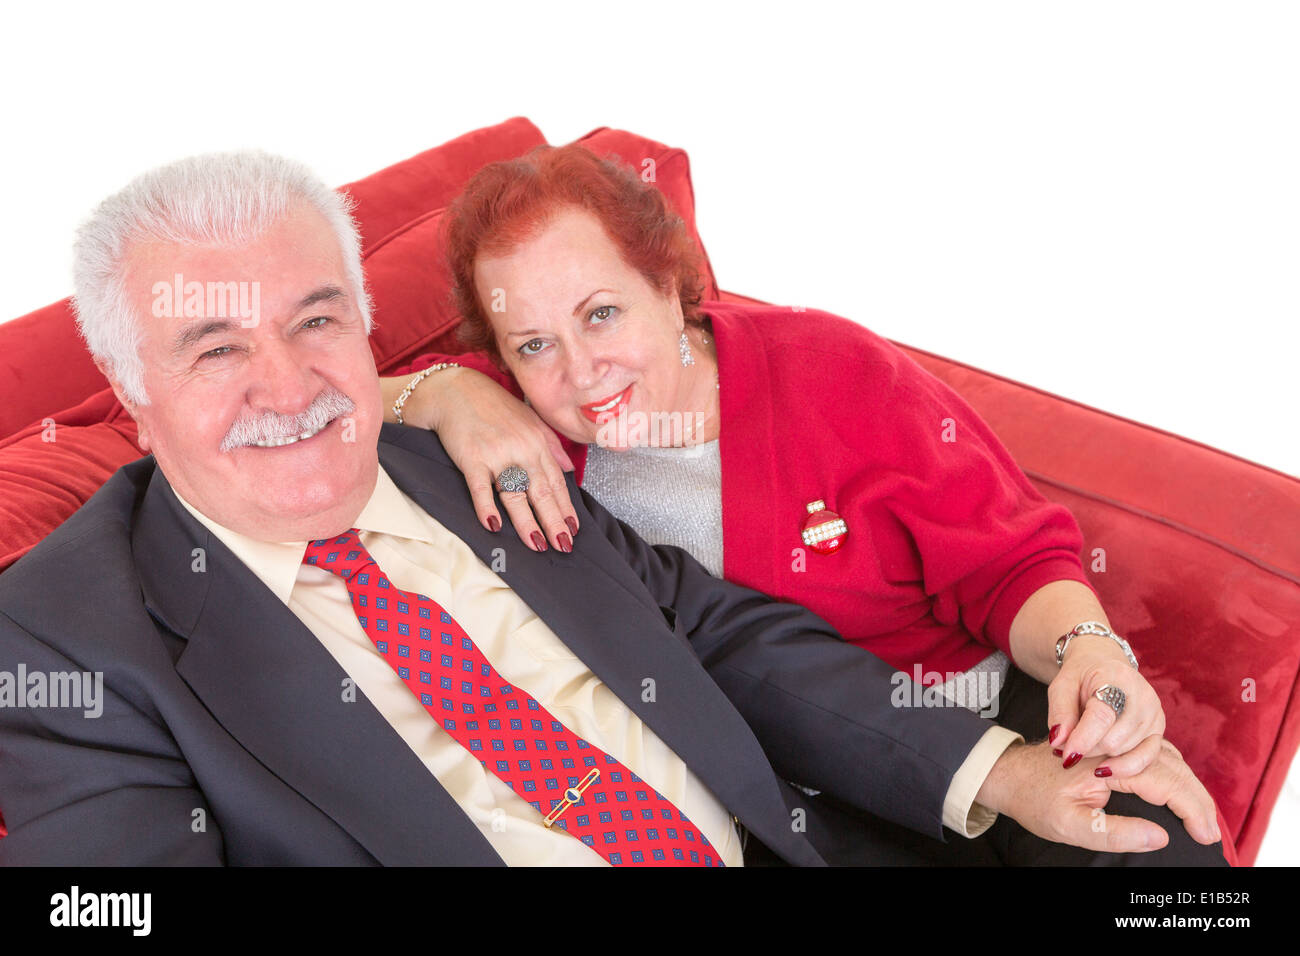 Senior couple sitting on a comfortable red couch holding hands affectionately and looking up at the camera with friendly smiles Stock Photo